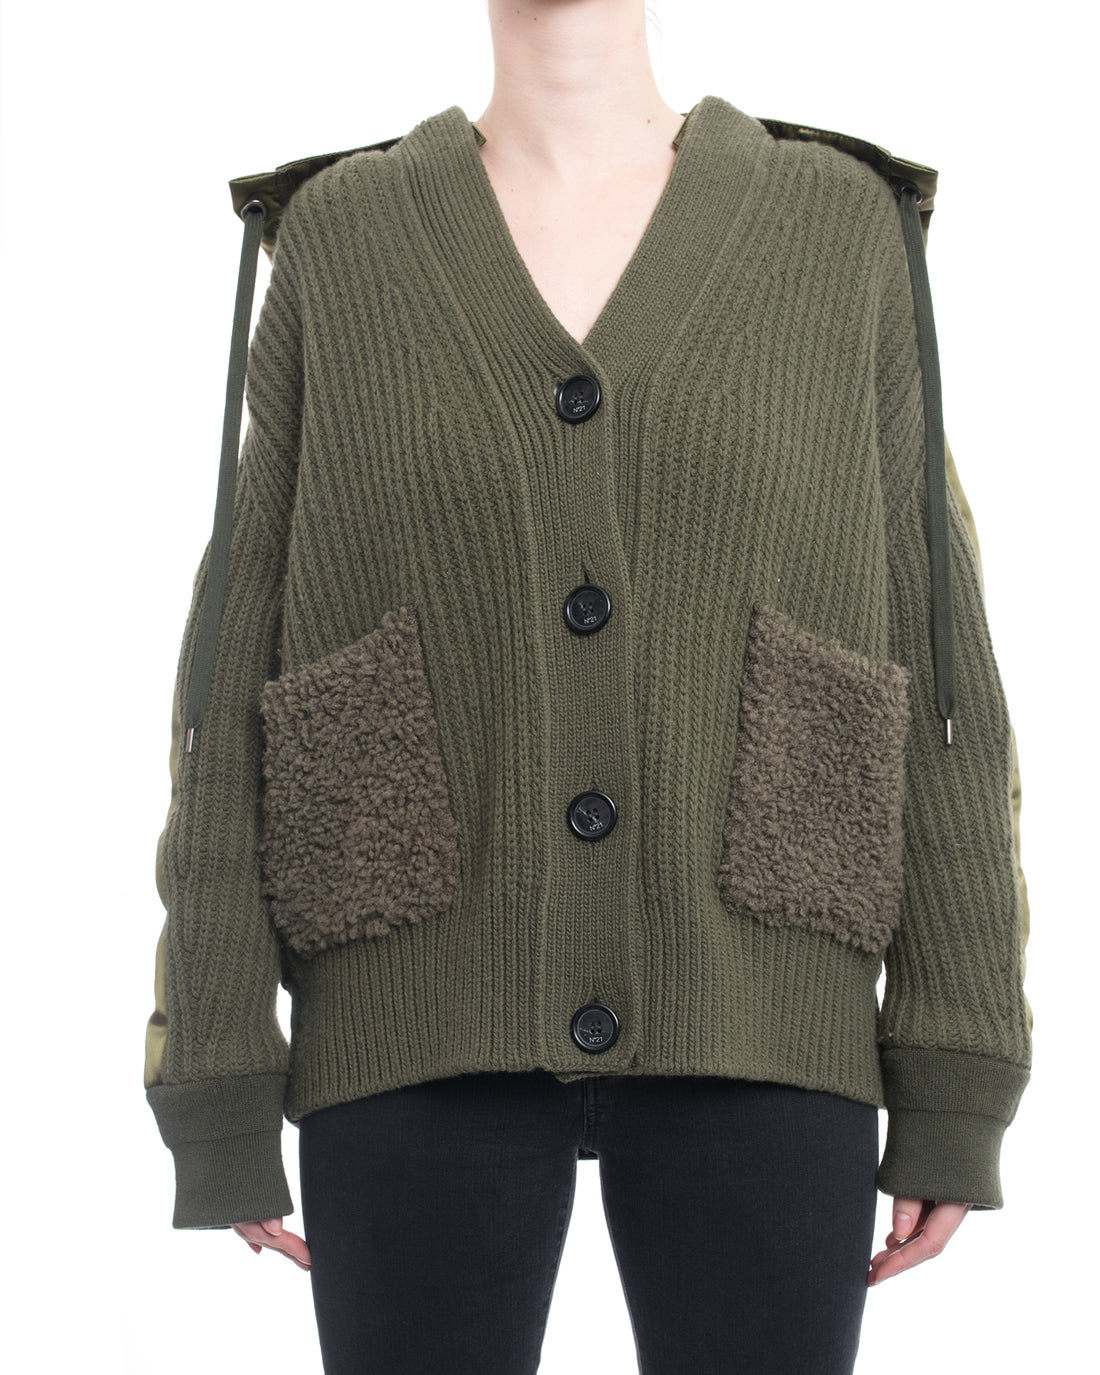 No. 21 Spring 2018 Olive Green Knit and Satin Hooded Jacket - 6